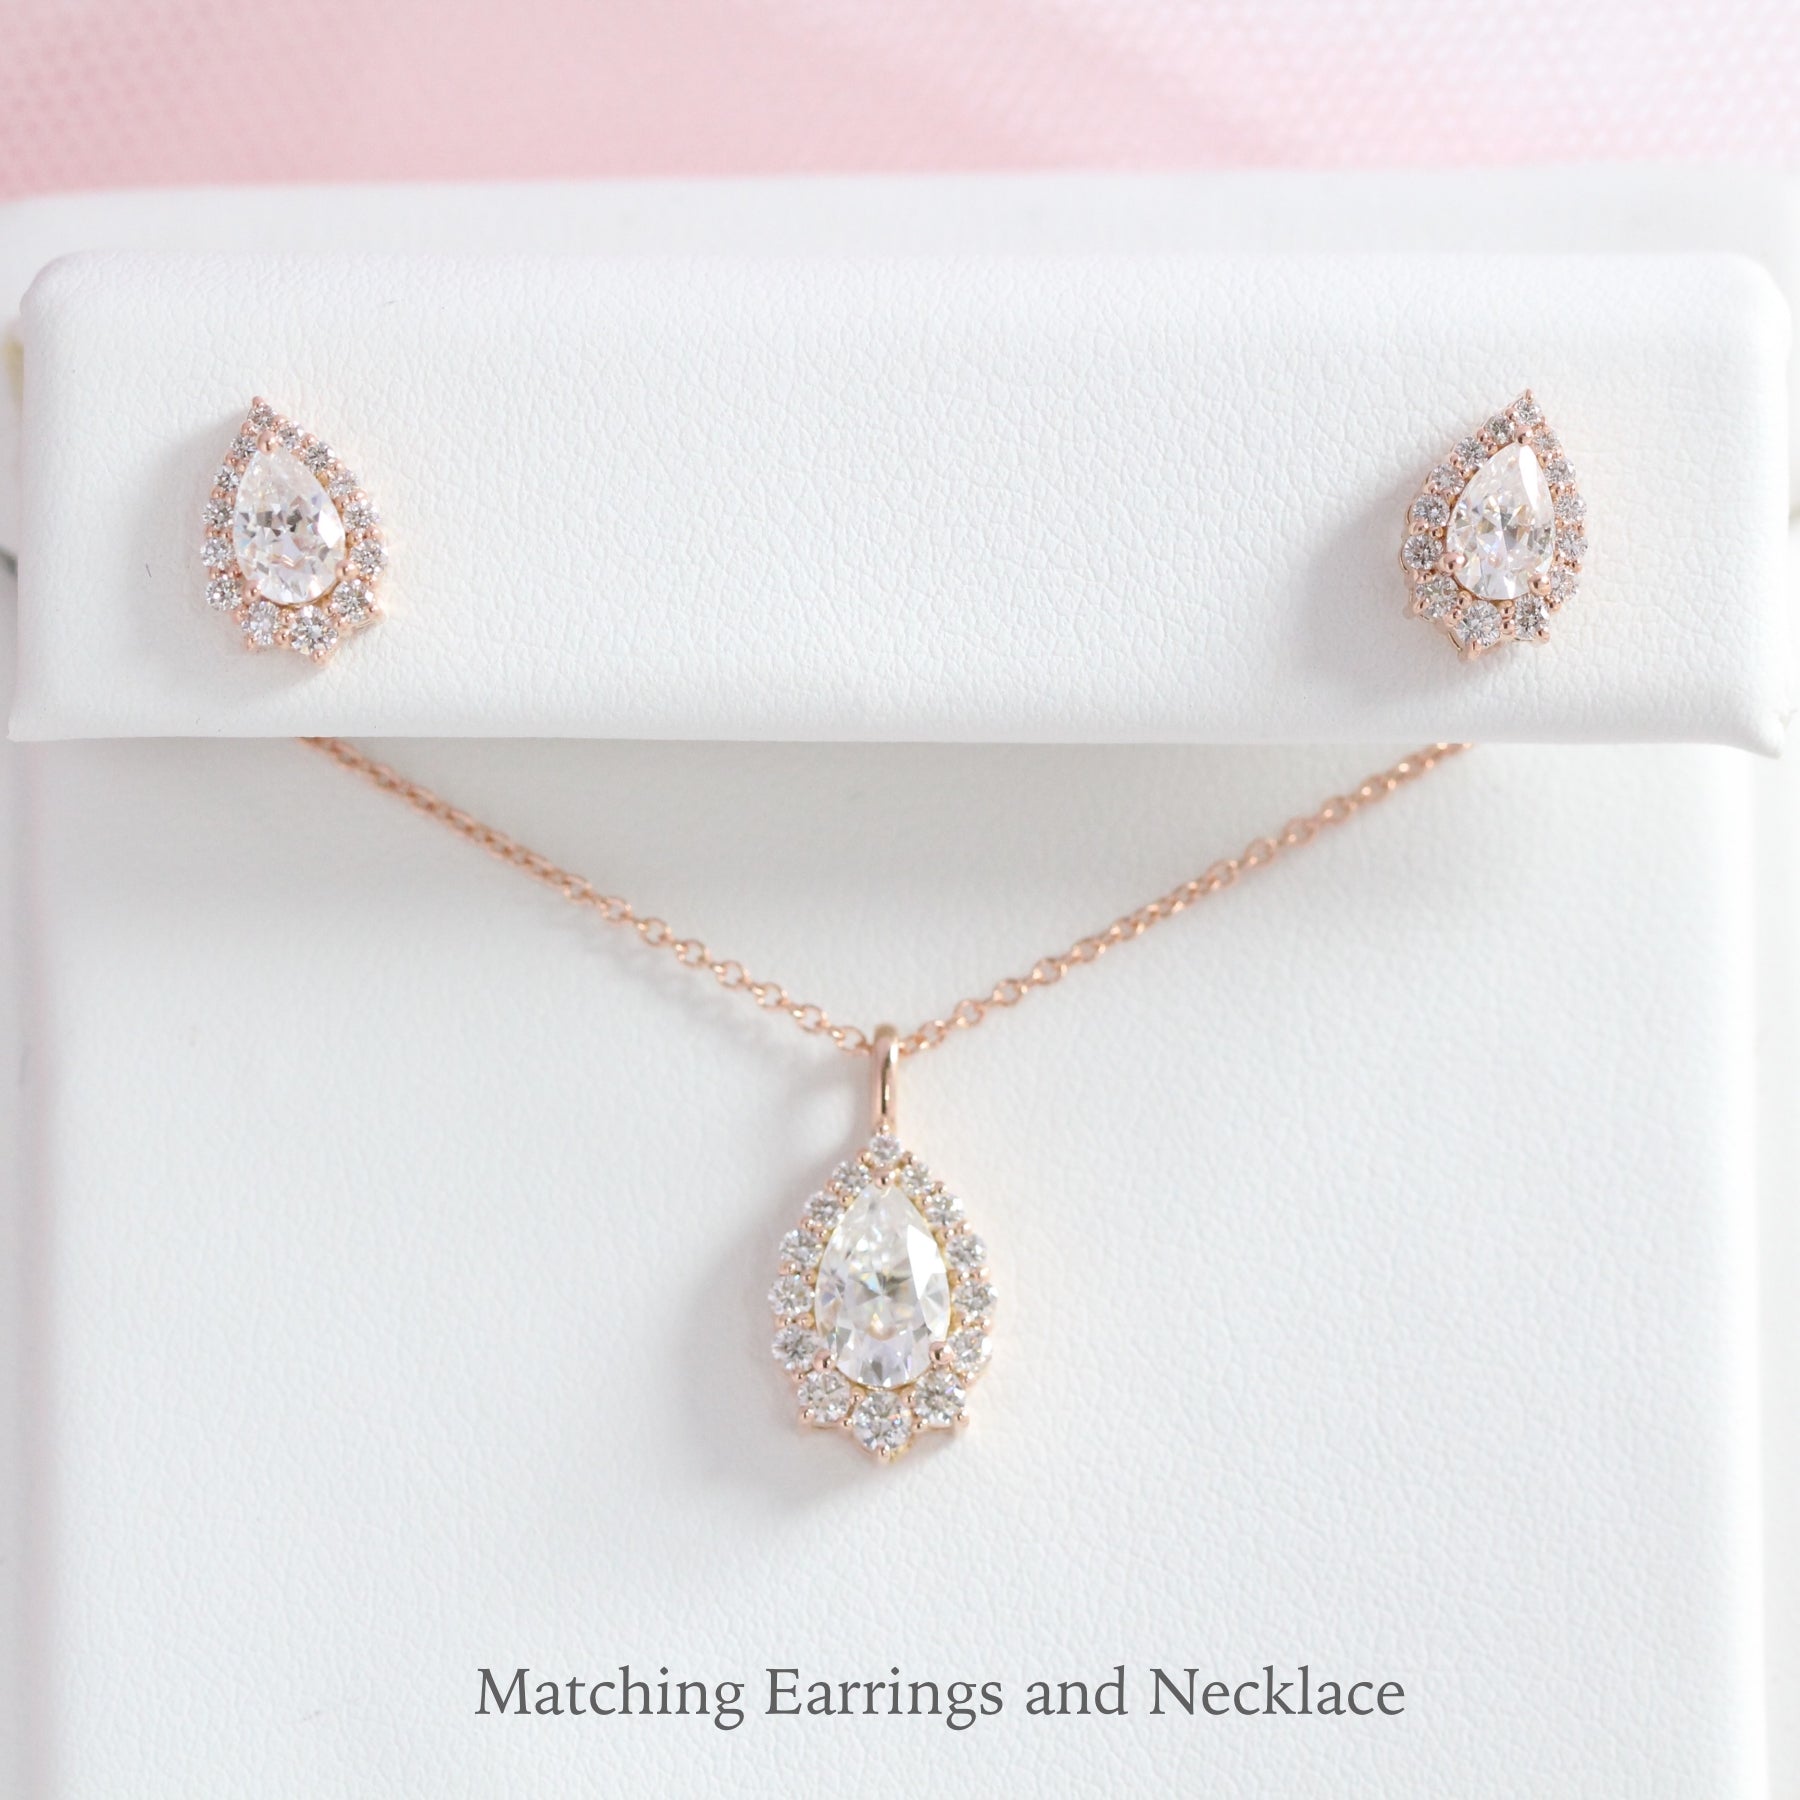 Matching Diamond Earrings and Necklace Rose Gold Wedding Jewelry Set La More Design Jewelry